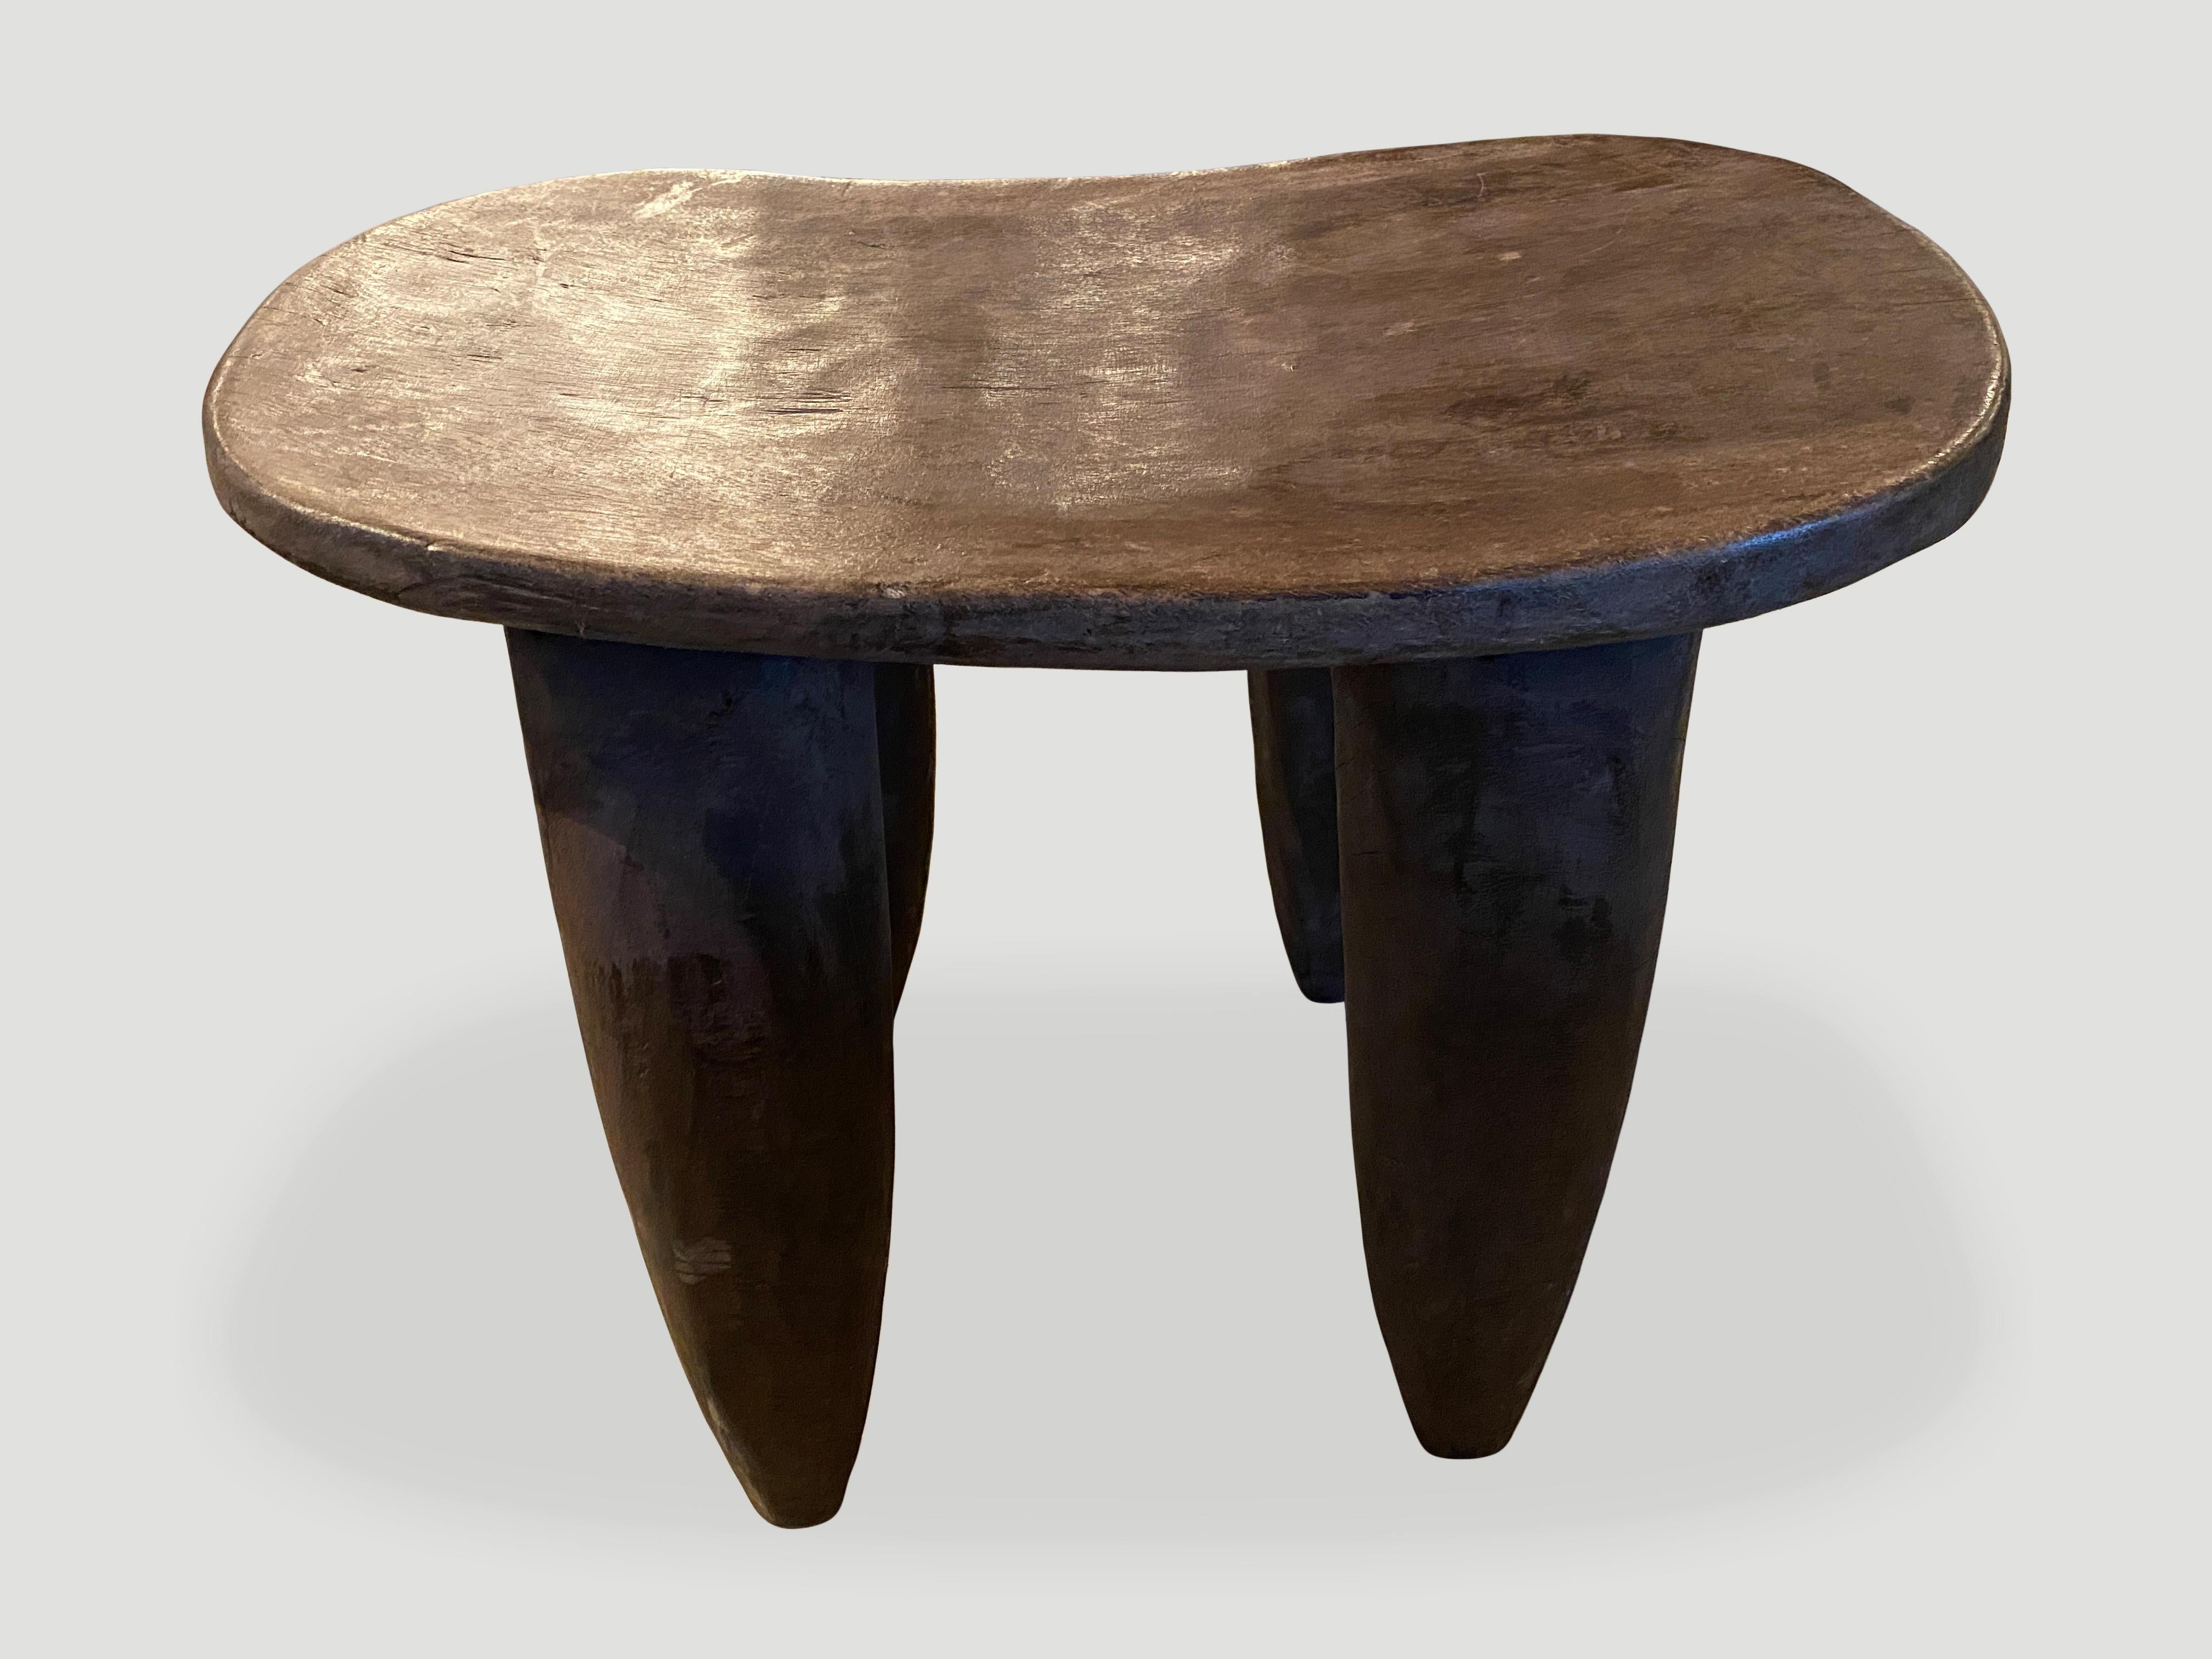 Ivorian Andrianna Shamaris Senufo Side Table or Bench from The Ivory Coast